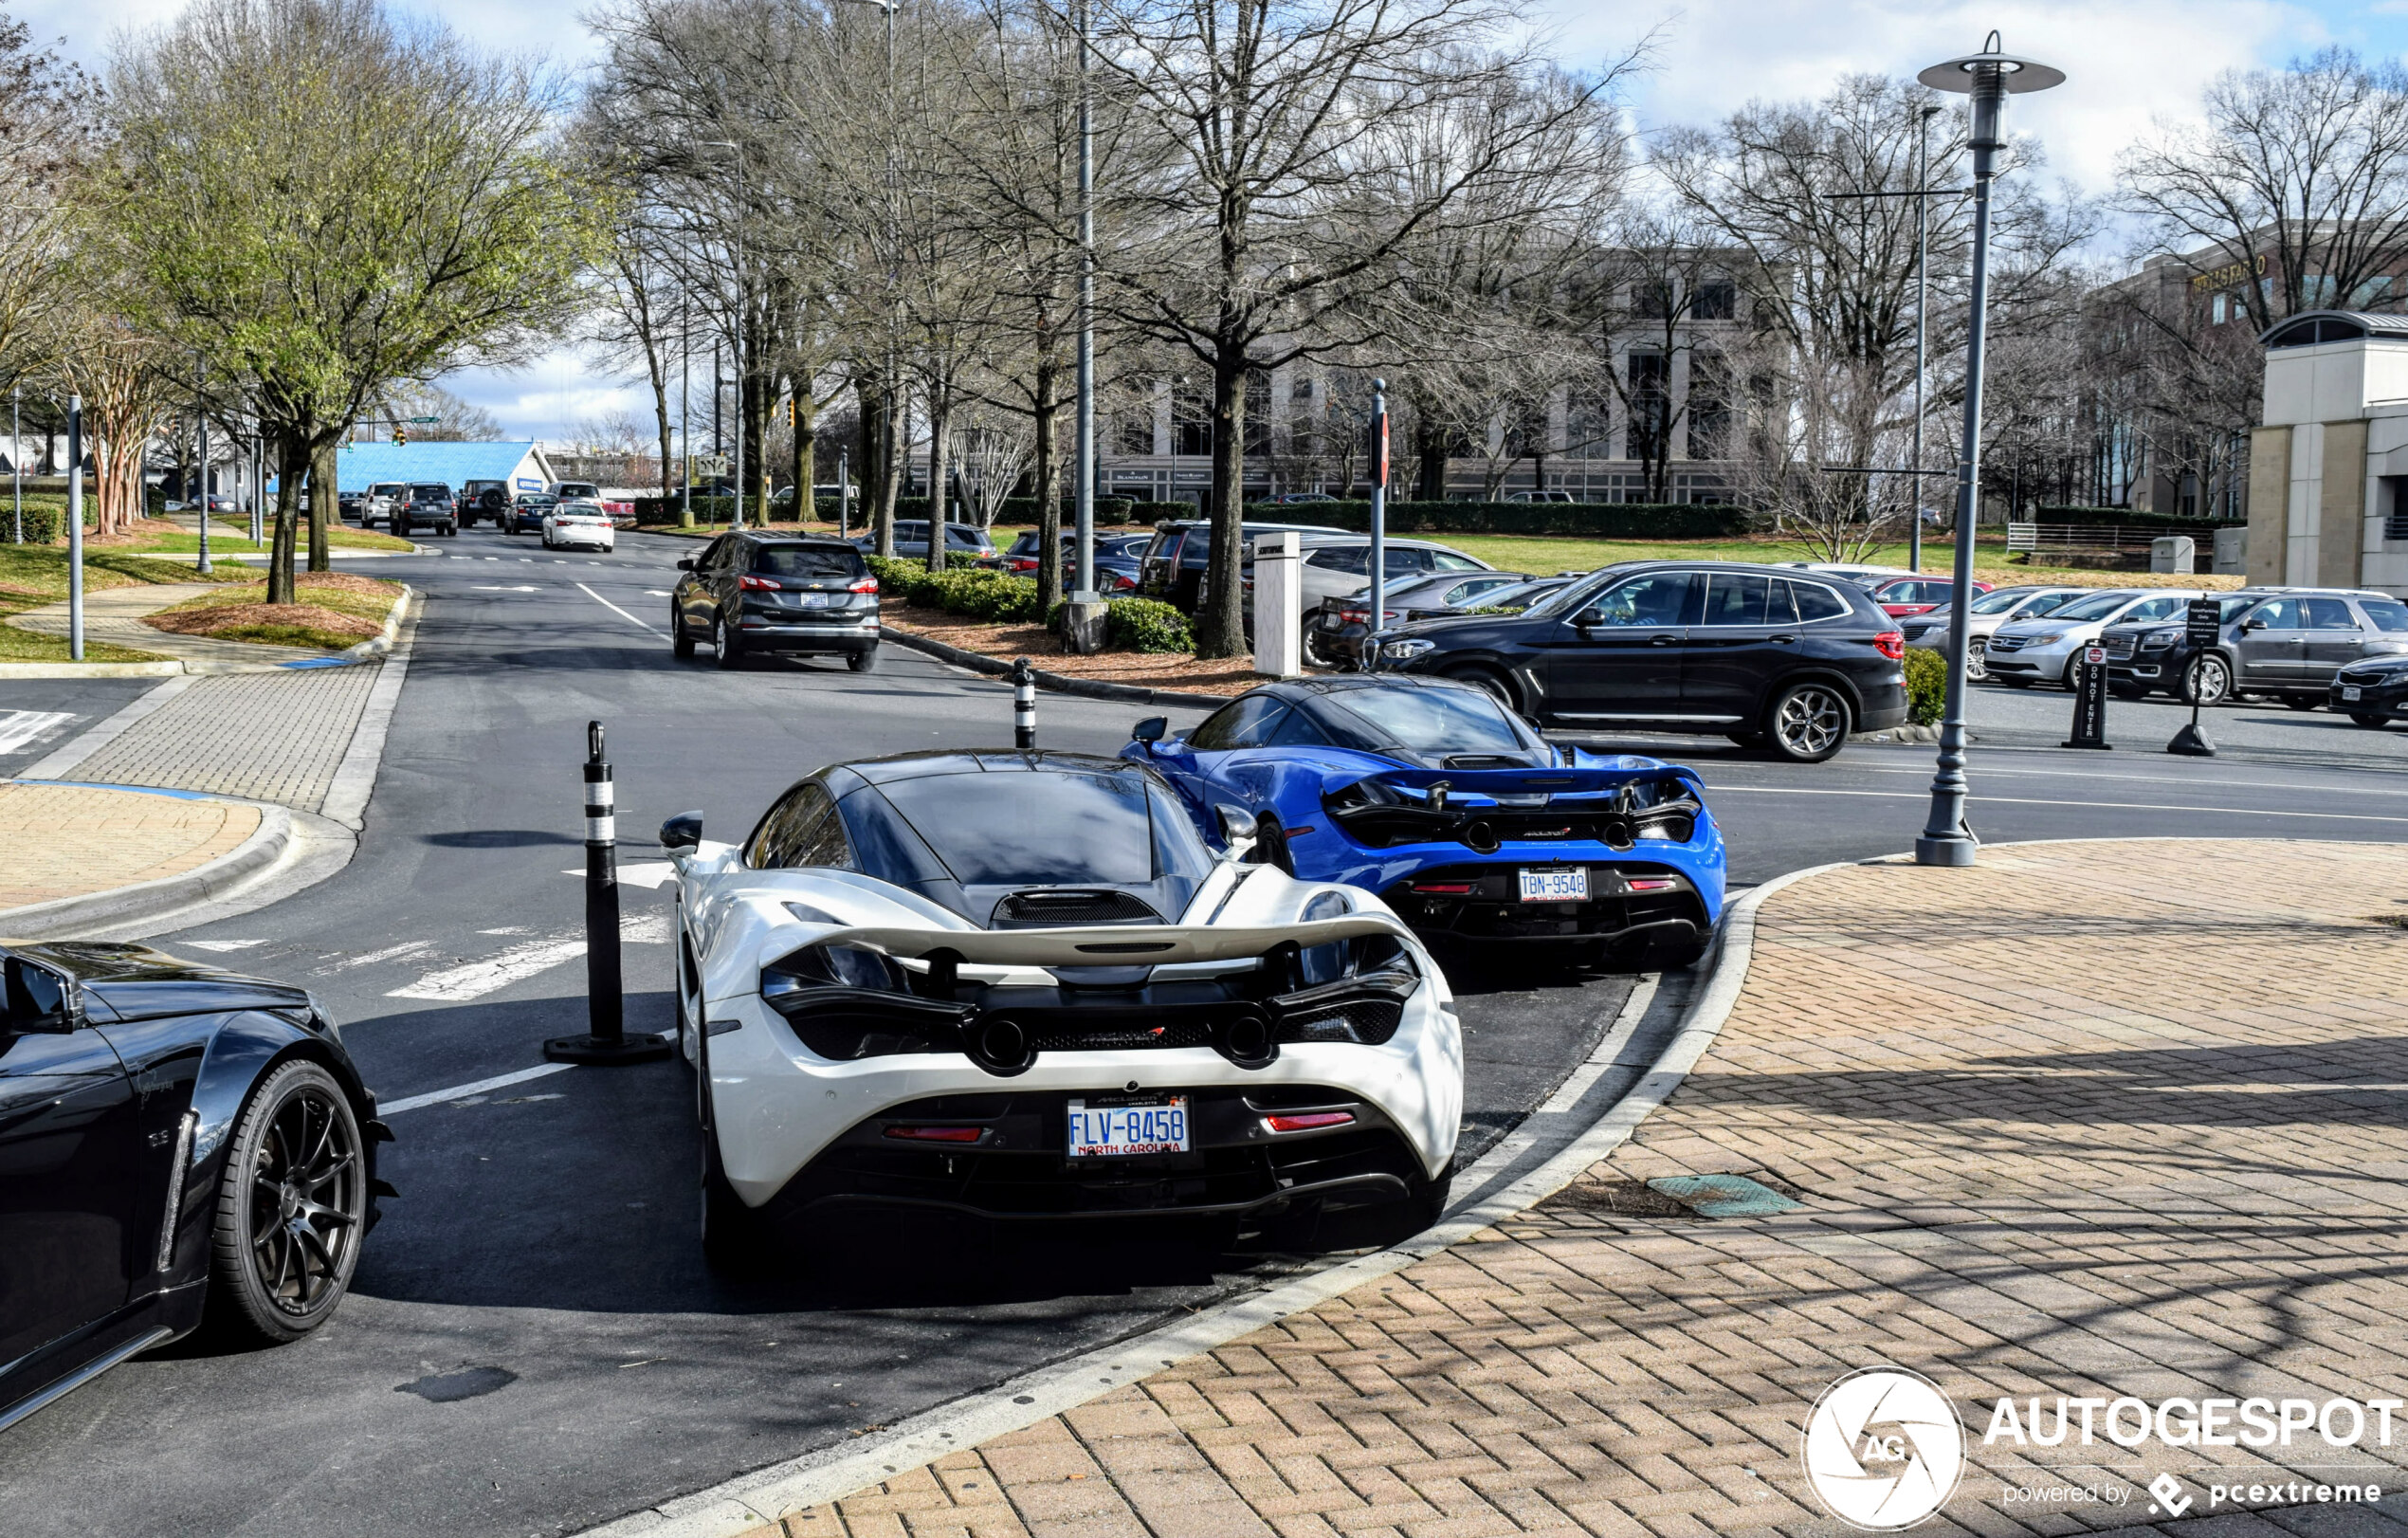 Spot of the day: USA Mclaren 720S By Ncspotter.